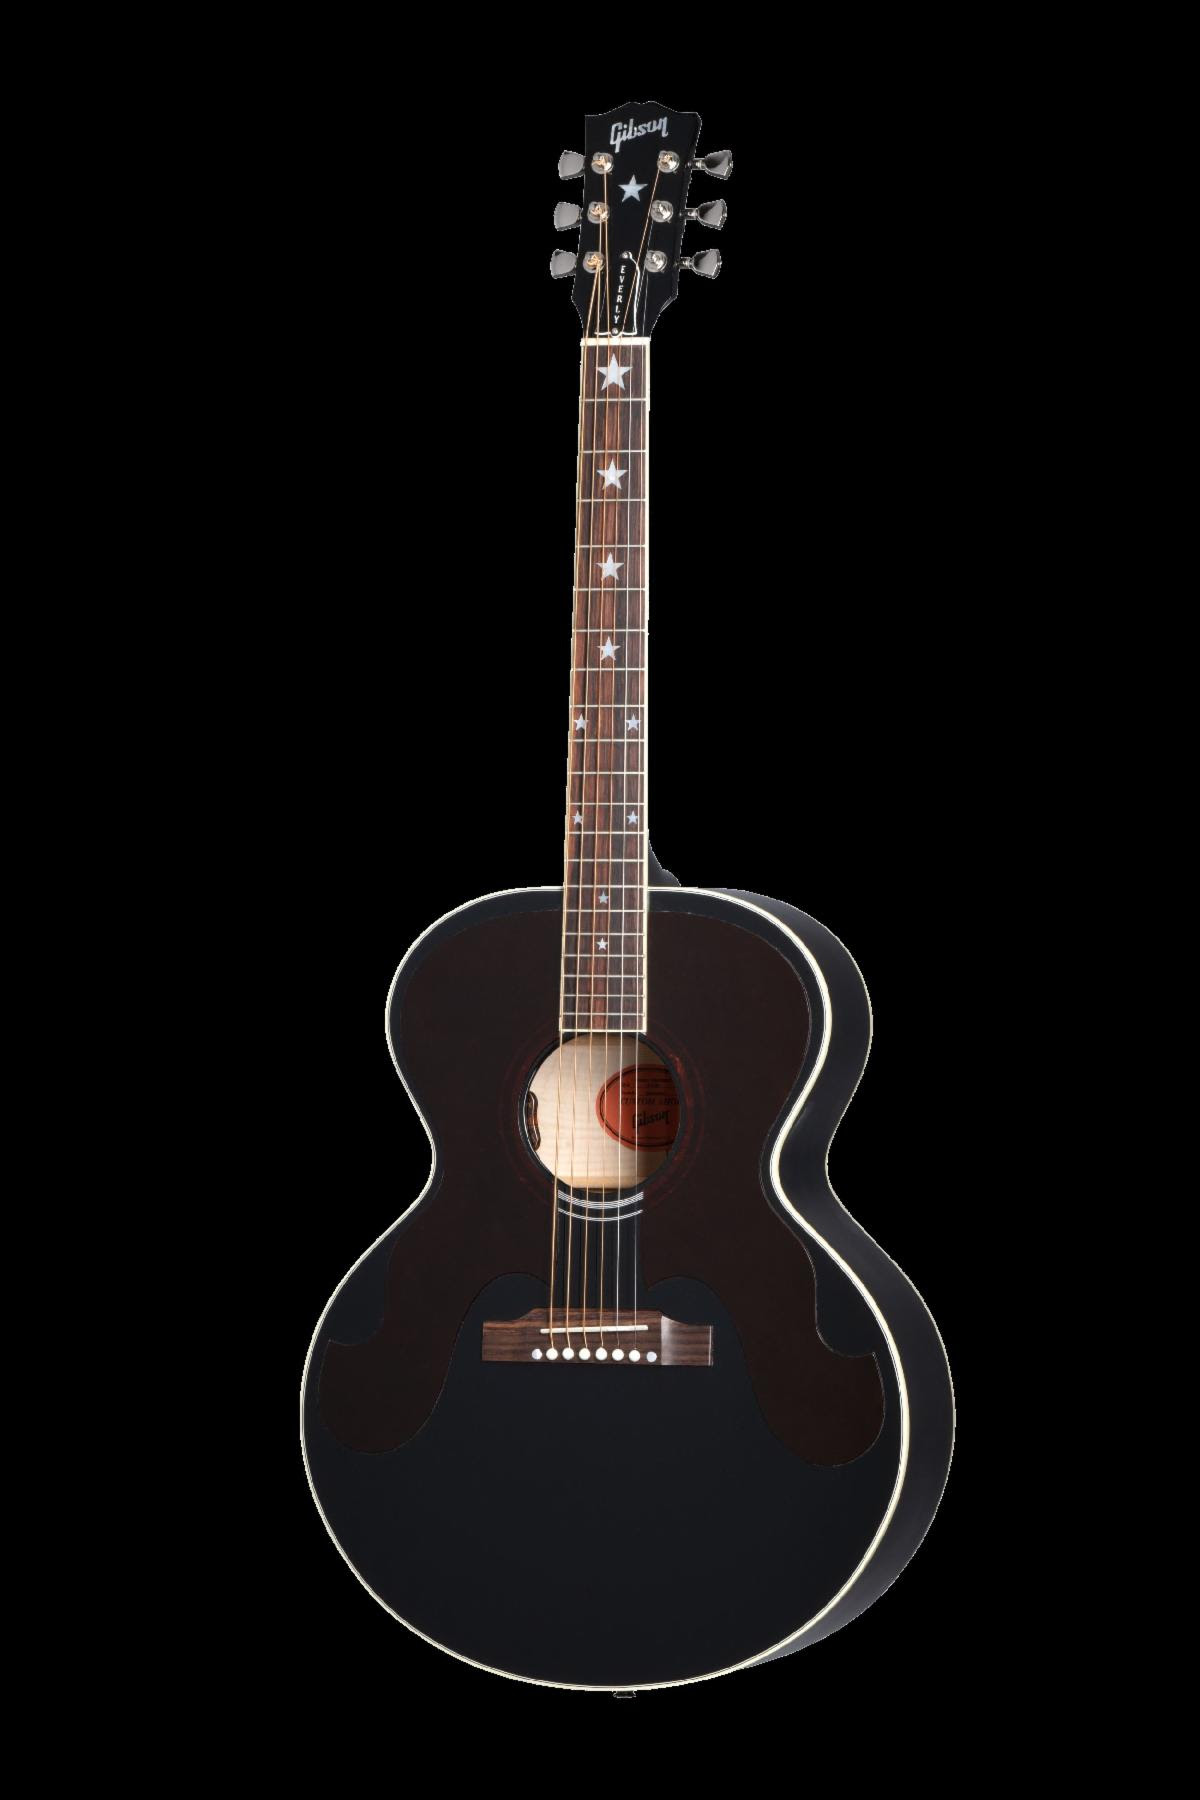  Gibson Everly Brothers J-180.